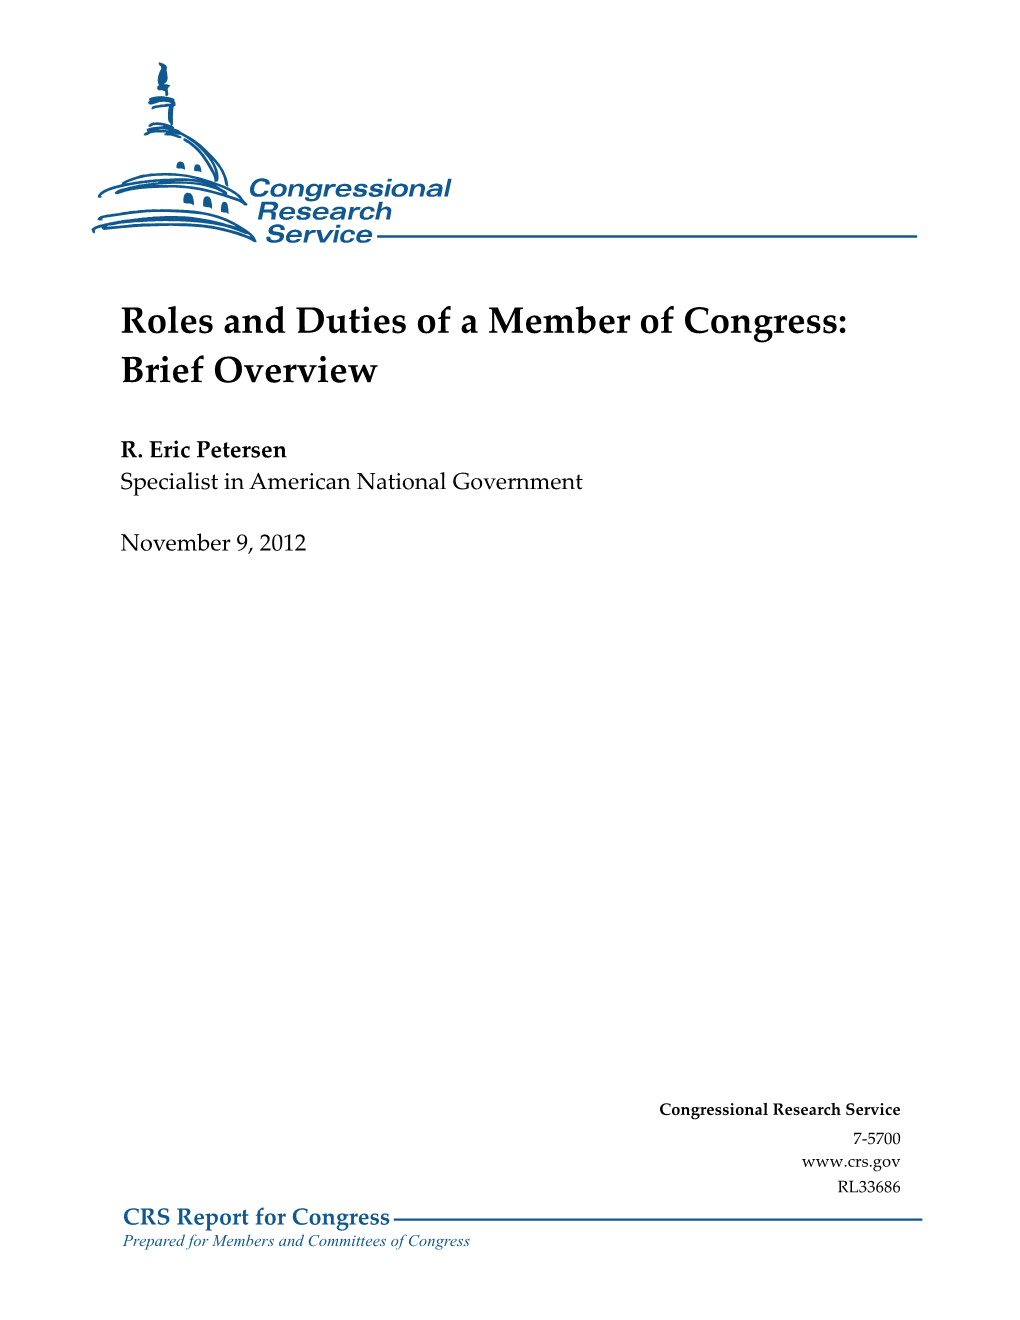 Roles and Duties of a Member of Congress: Brief Overview